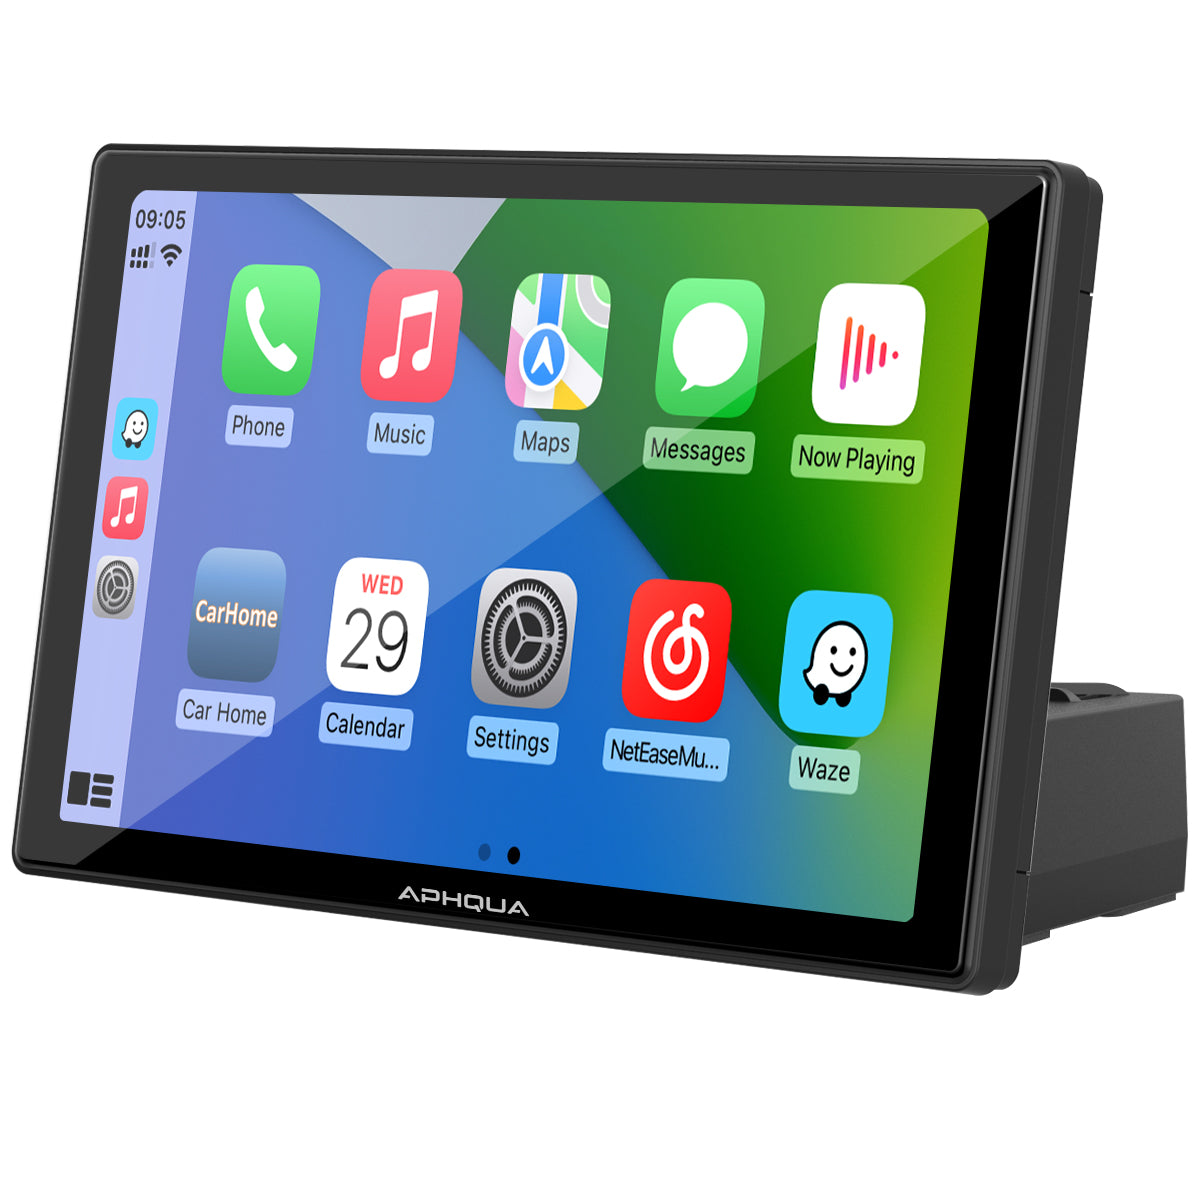 7 Inch Wireless Apple Carplay & Android Auto, AotuLink Portable Car Stereo,  HD Touch Screen with Mirror Link, Multimedia Player, Bluetooth, AUX/FM